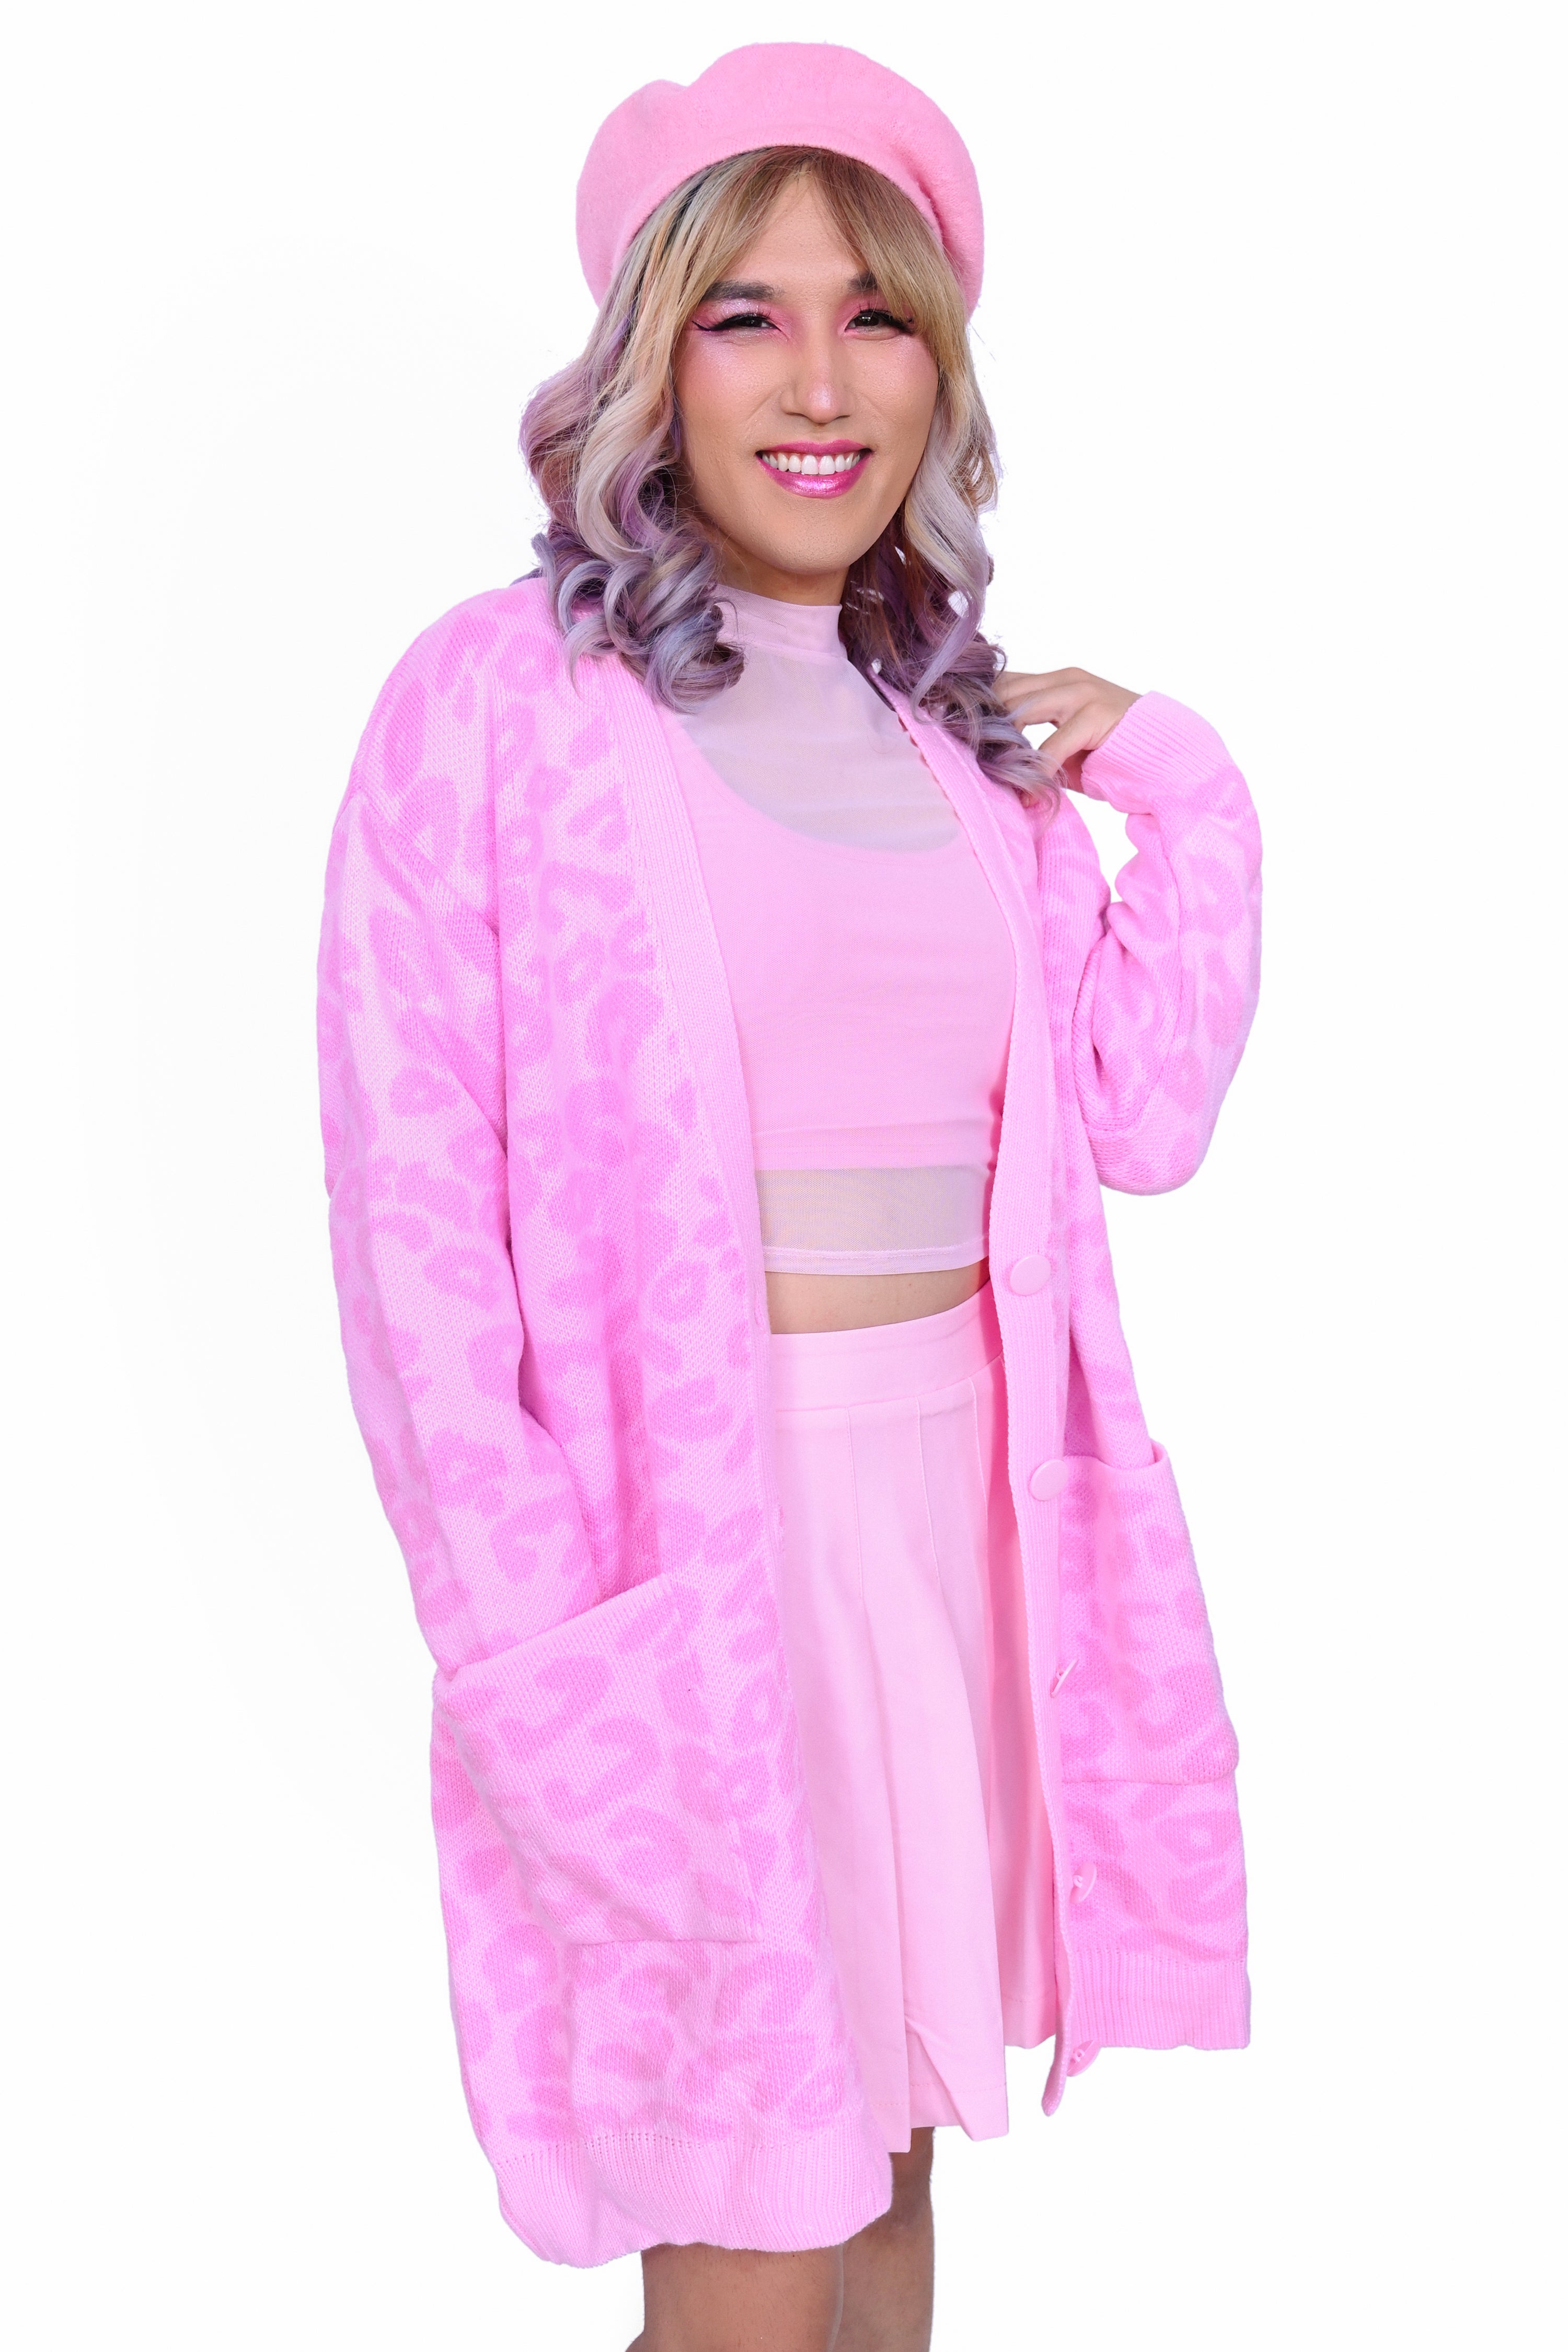 All over pink leopard print cardigan in a snuggly oversized fit.